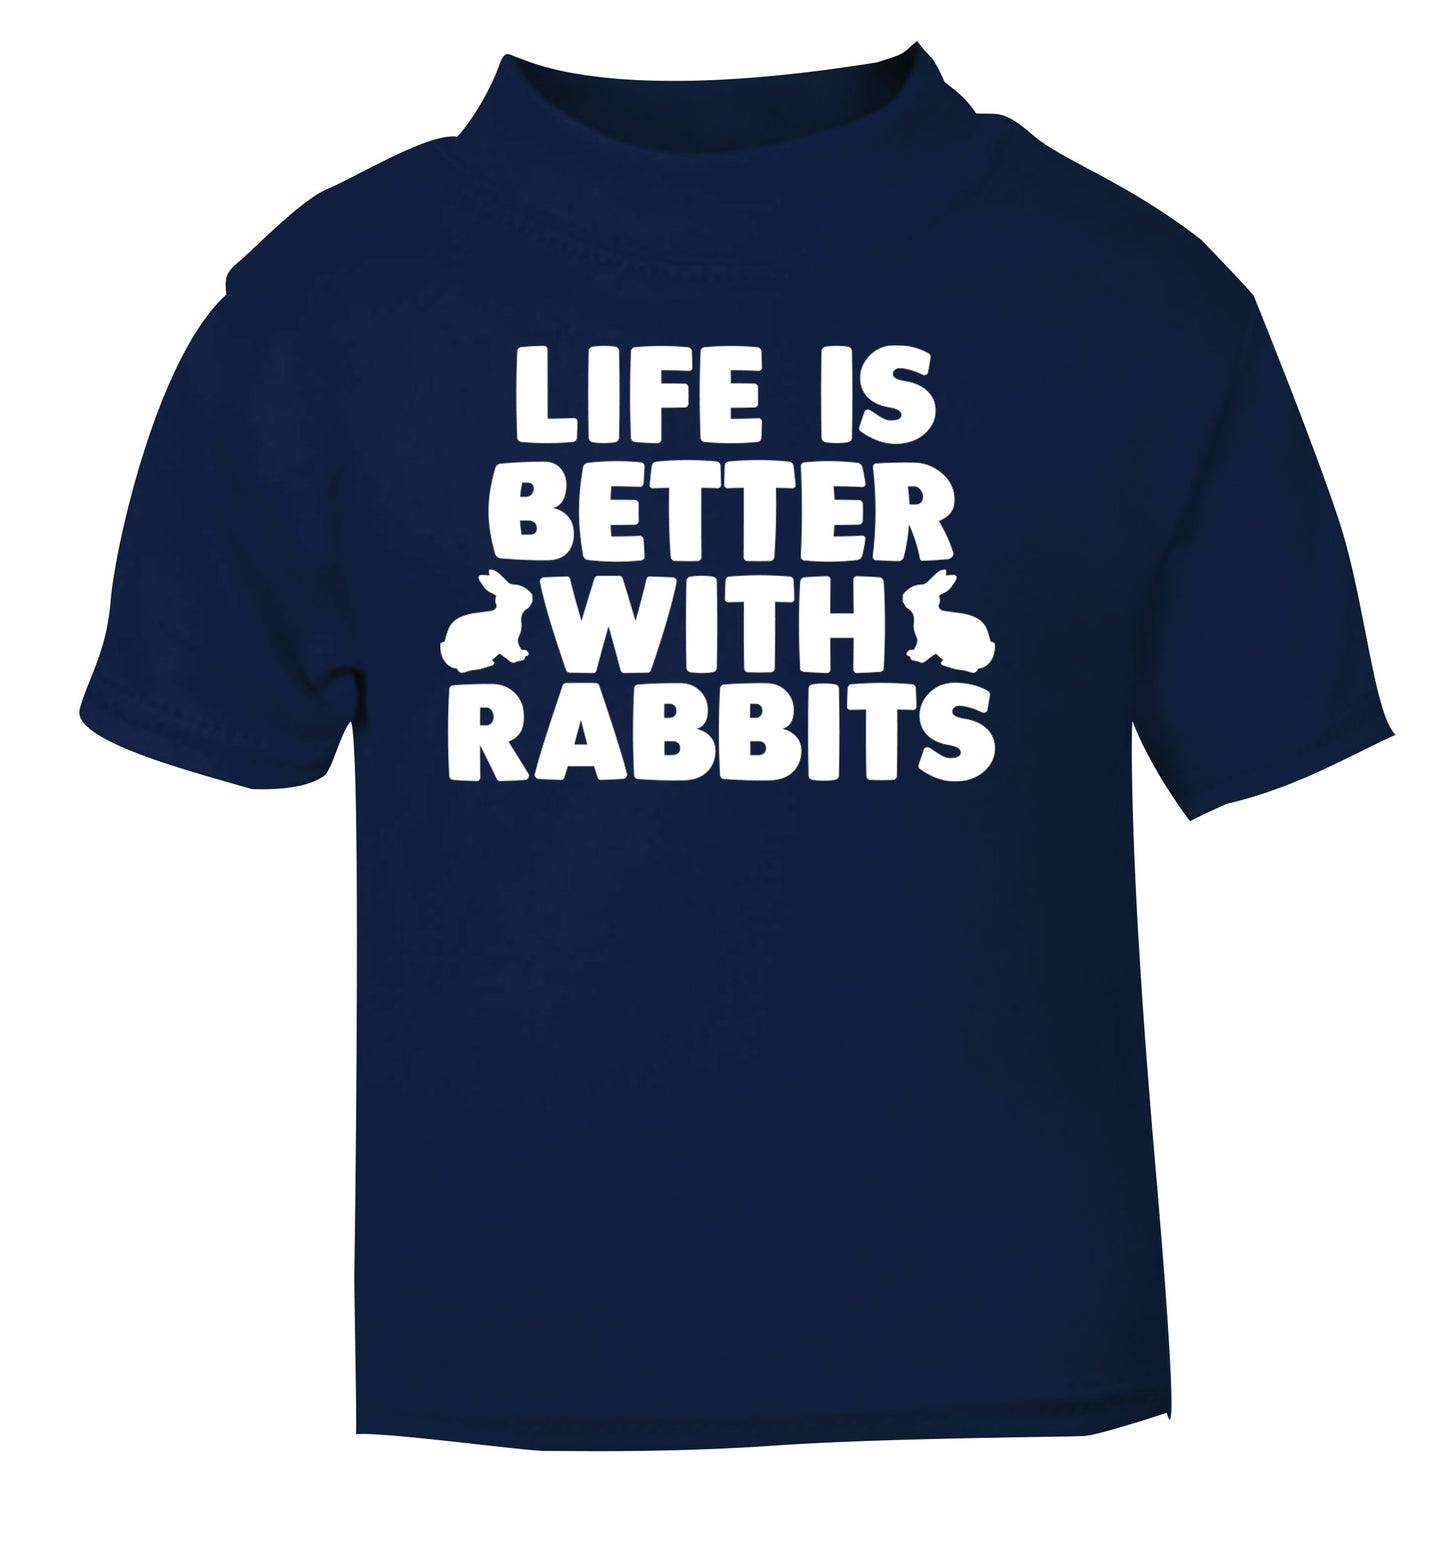 Life is better with rabbits navy Baby Toddler Tshirt 2 Years